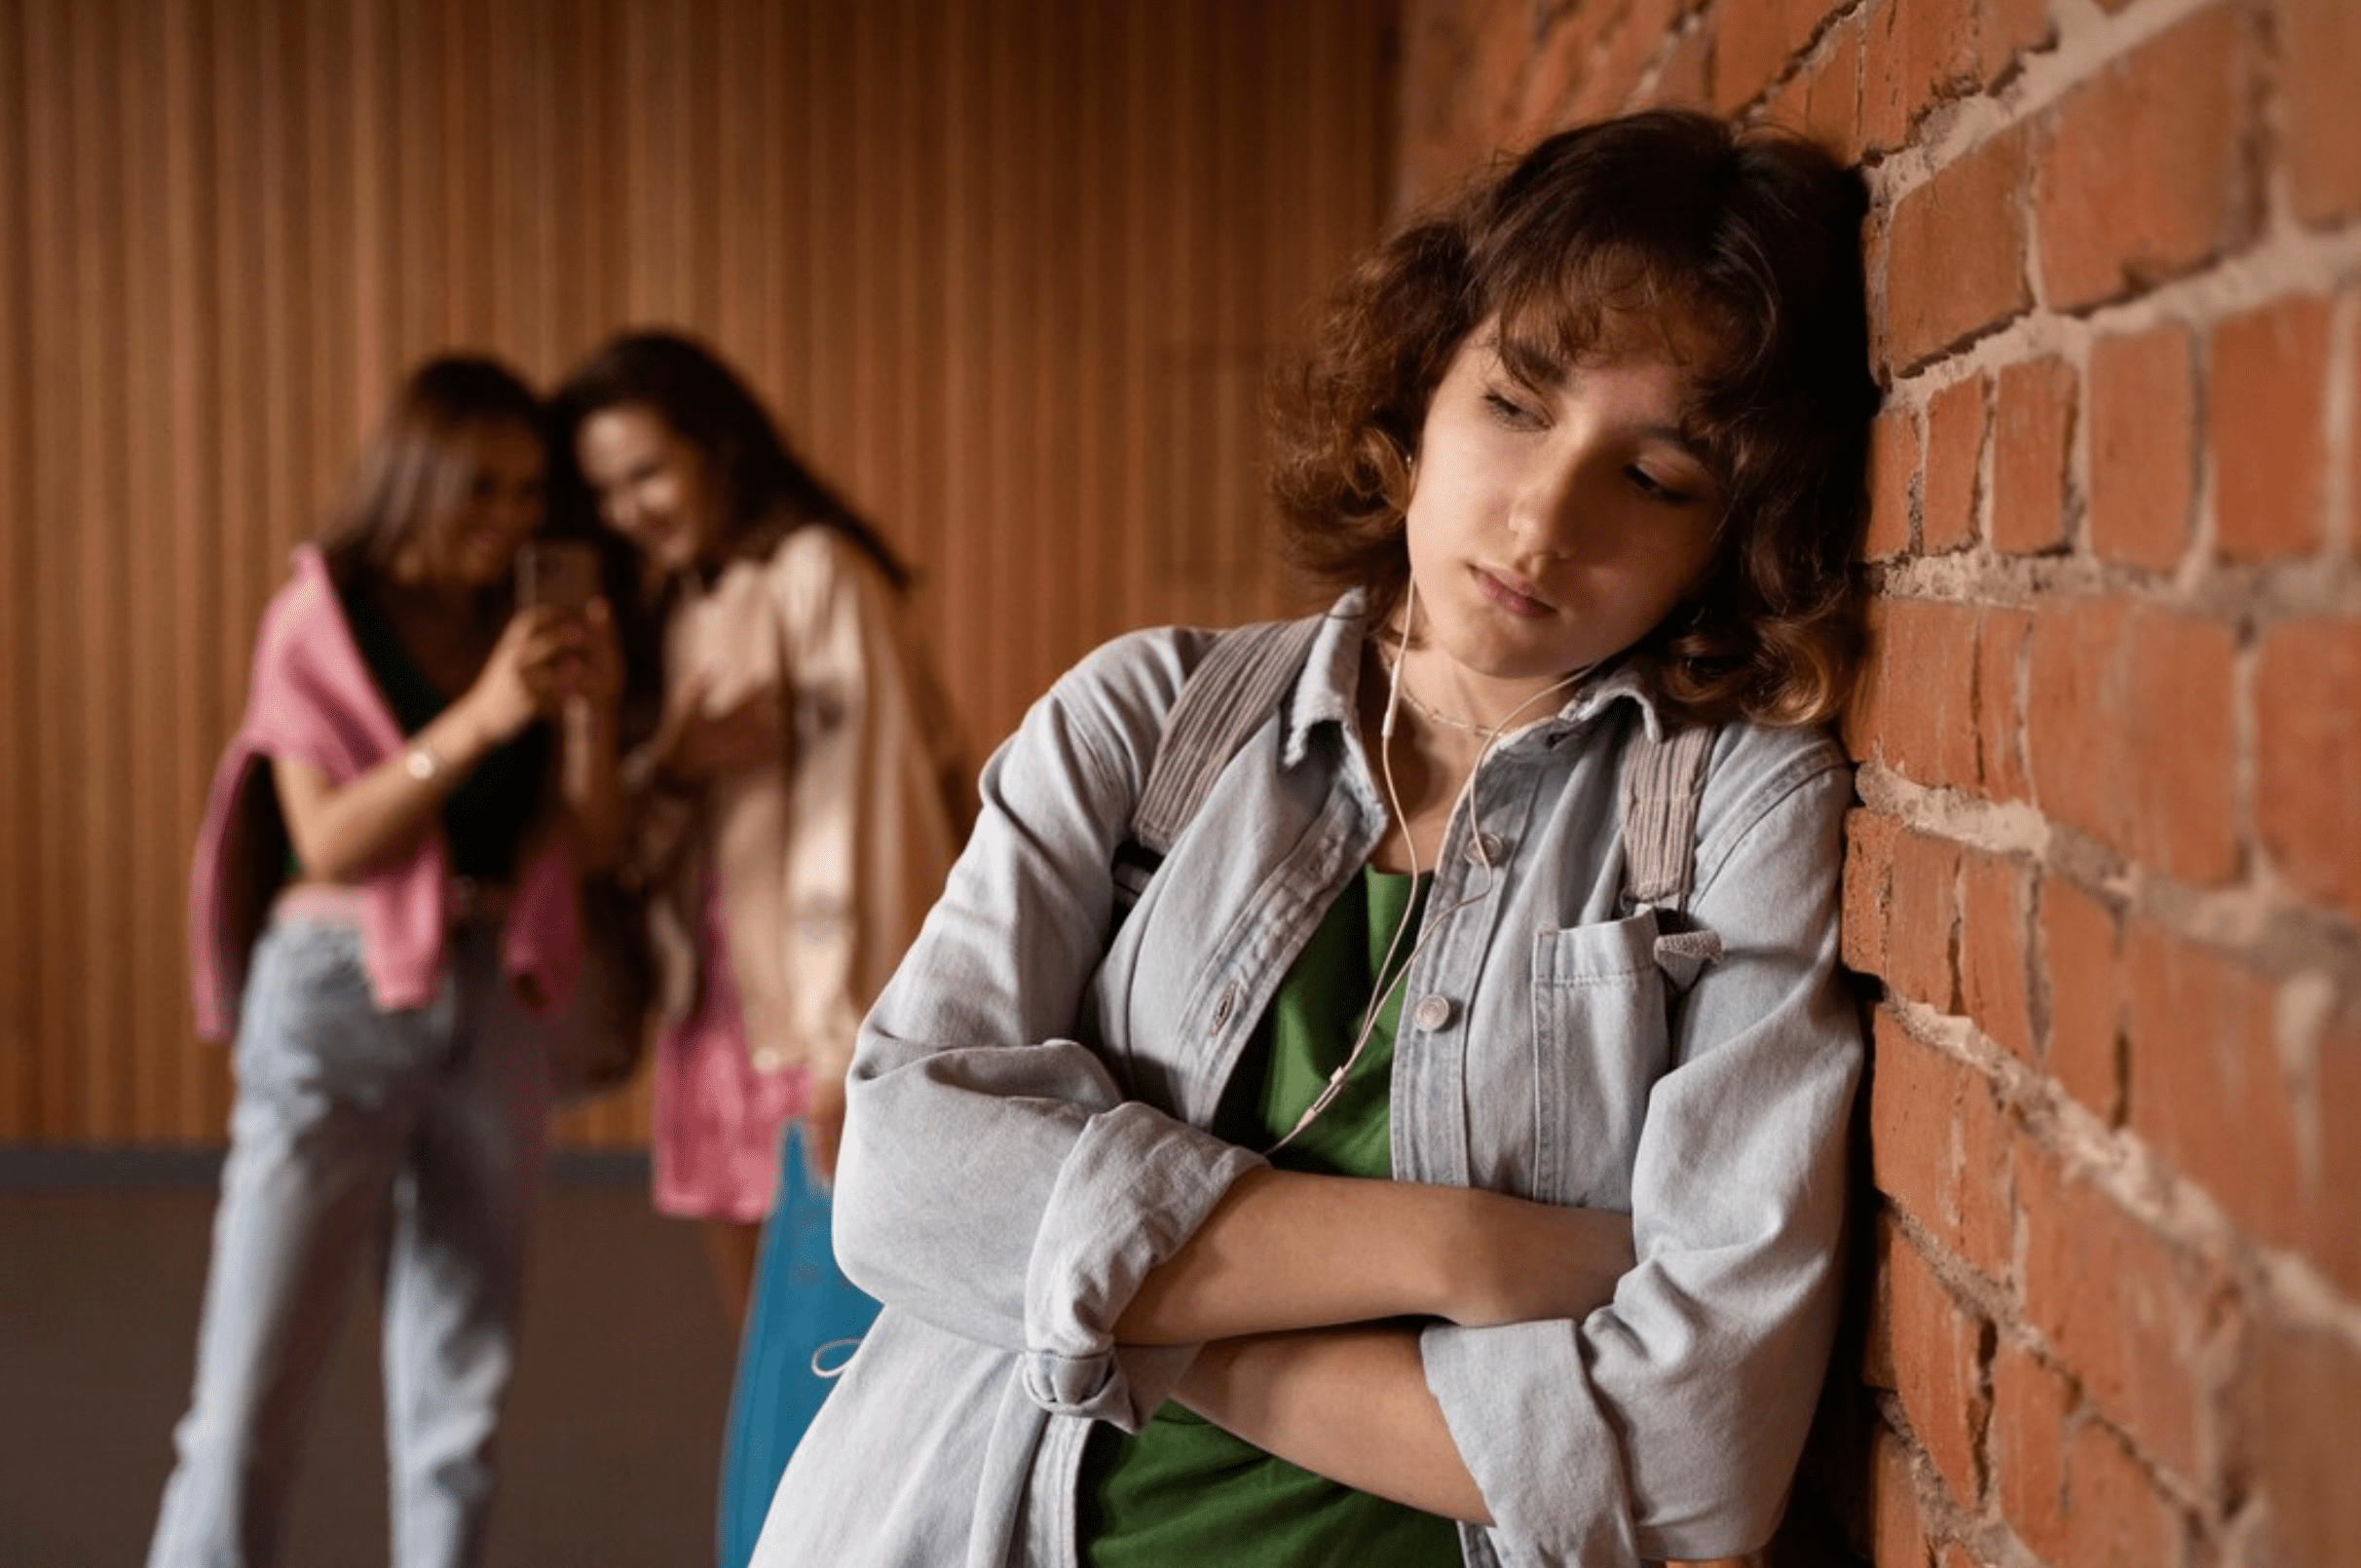 Bullying Among Youth: A Collective Concern and Responsibility